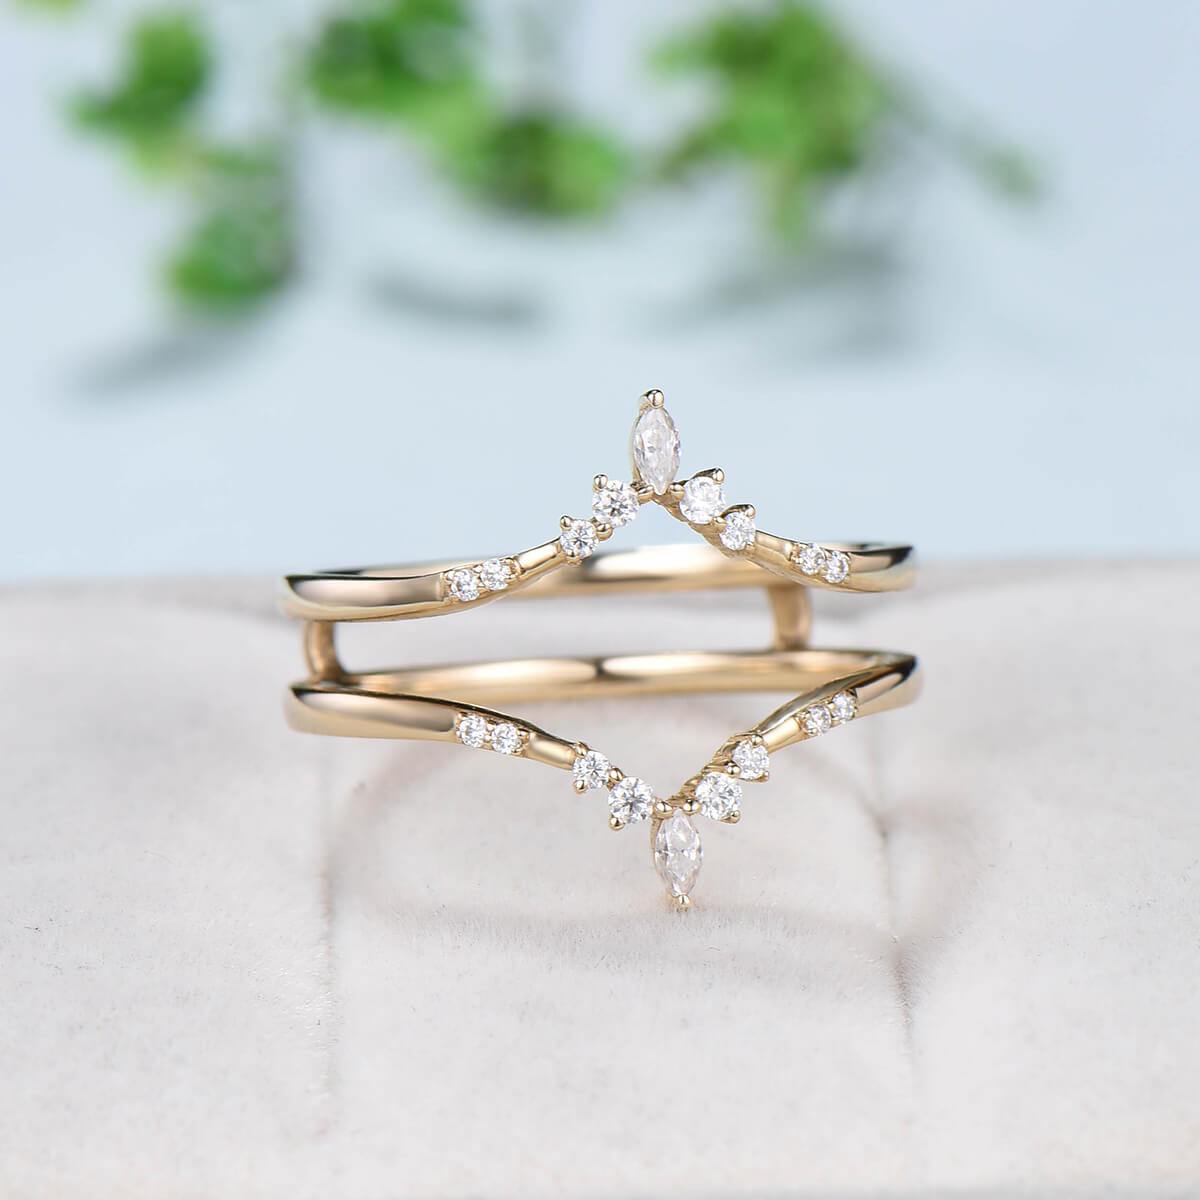 Buy Matching Wedding Rings With Unique Design. Gold Wedding Bands Set.  Couple Wedding Bands. Unique Wedding Bands. His and Hers Wedding Rings.  Online in India - Etsy